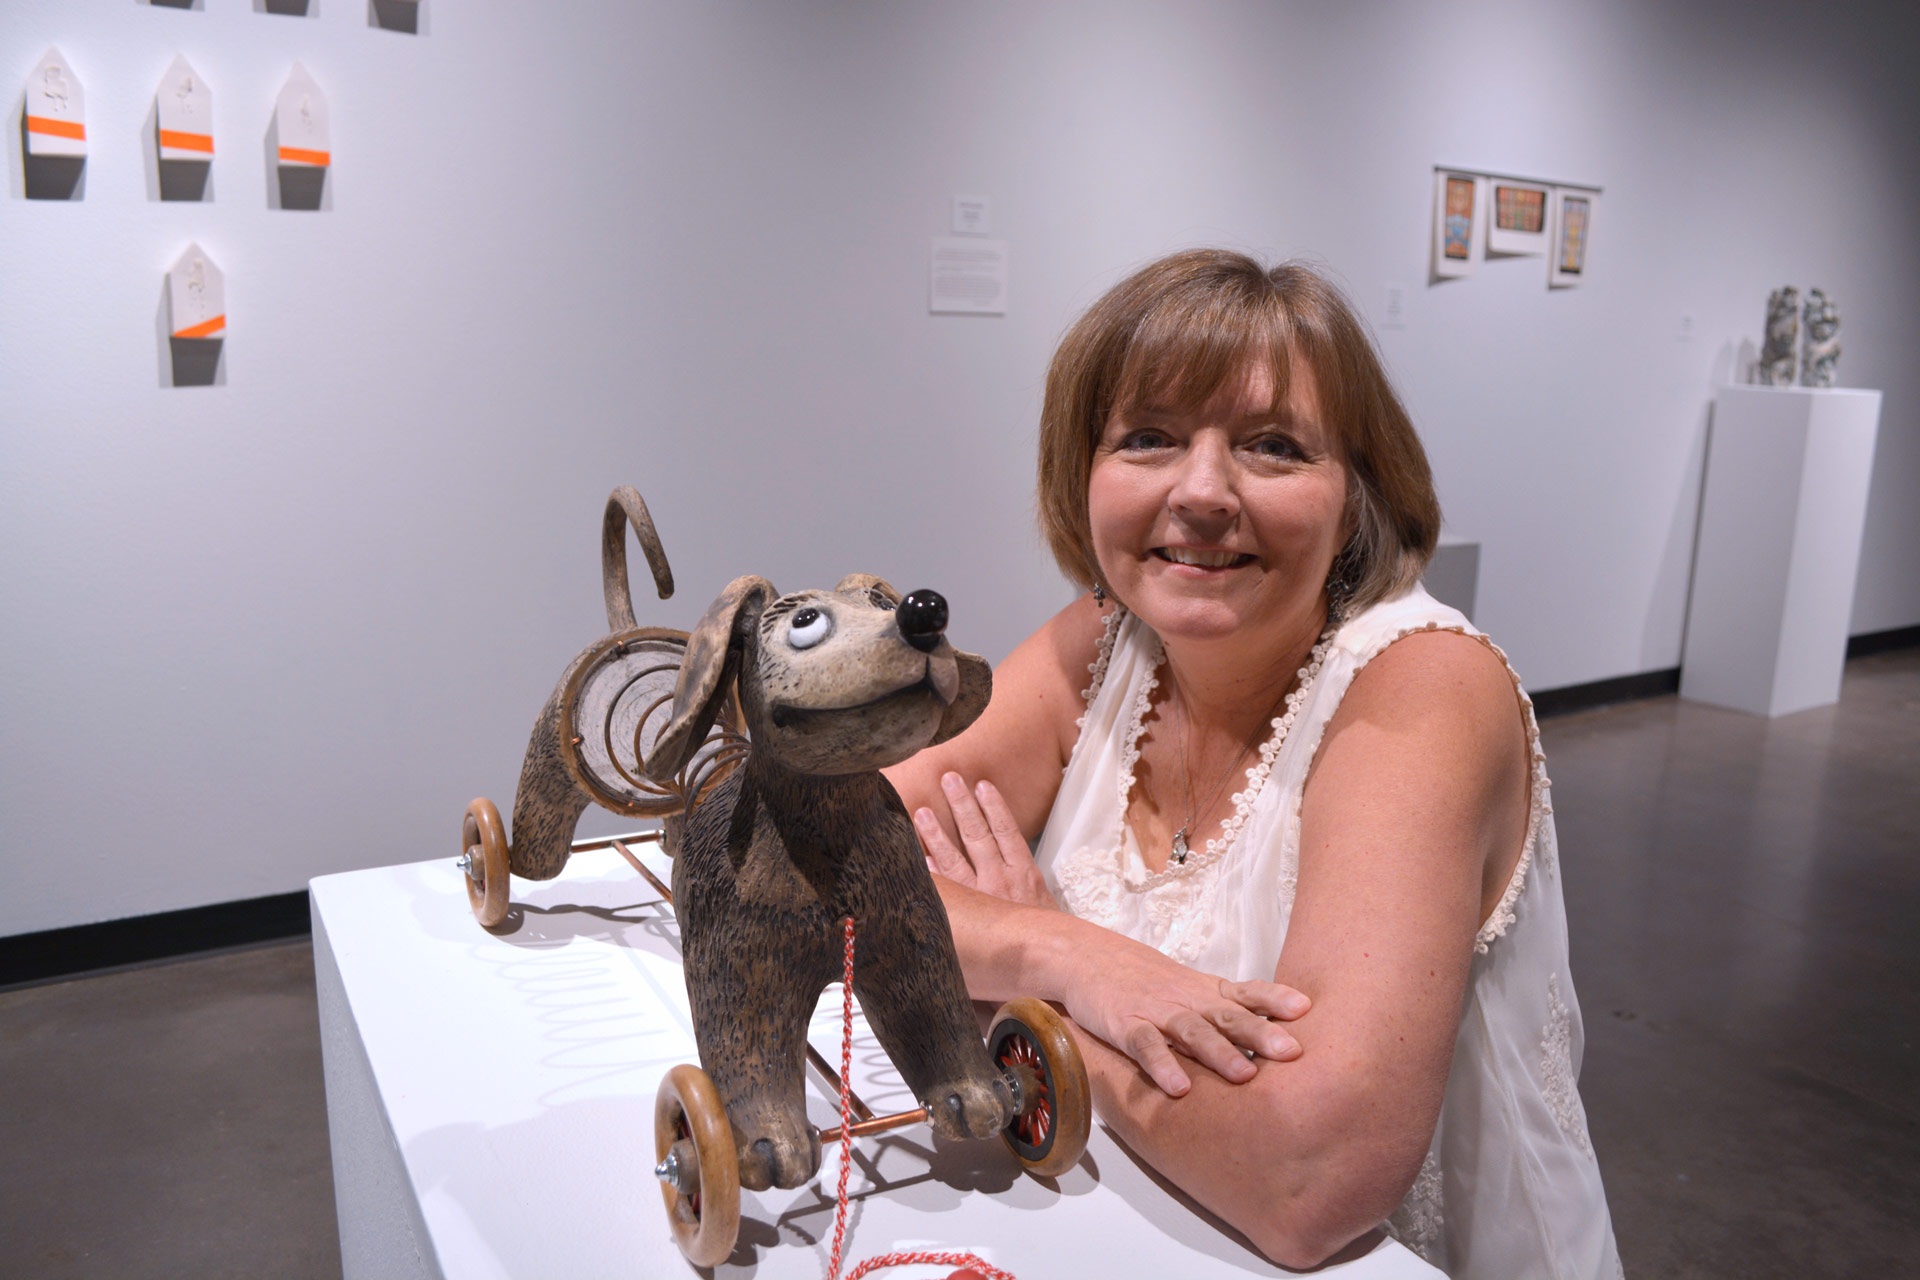 Toy Story: UHCL artist is serious about play